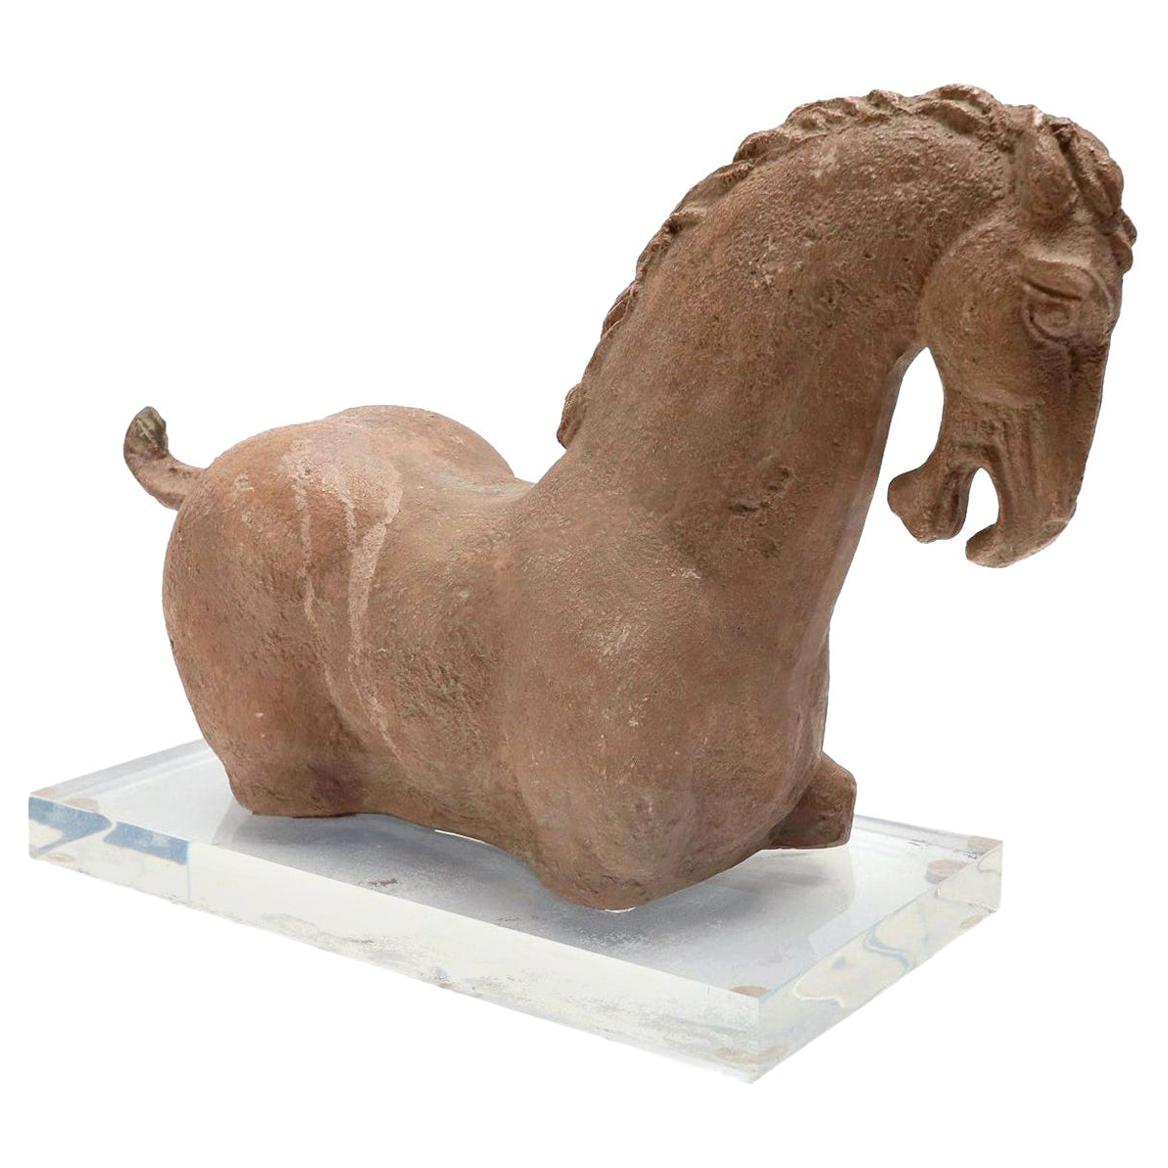 Tan Stone Horse Sculpture on a Clear Acrylic Base, 1980s